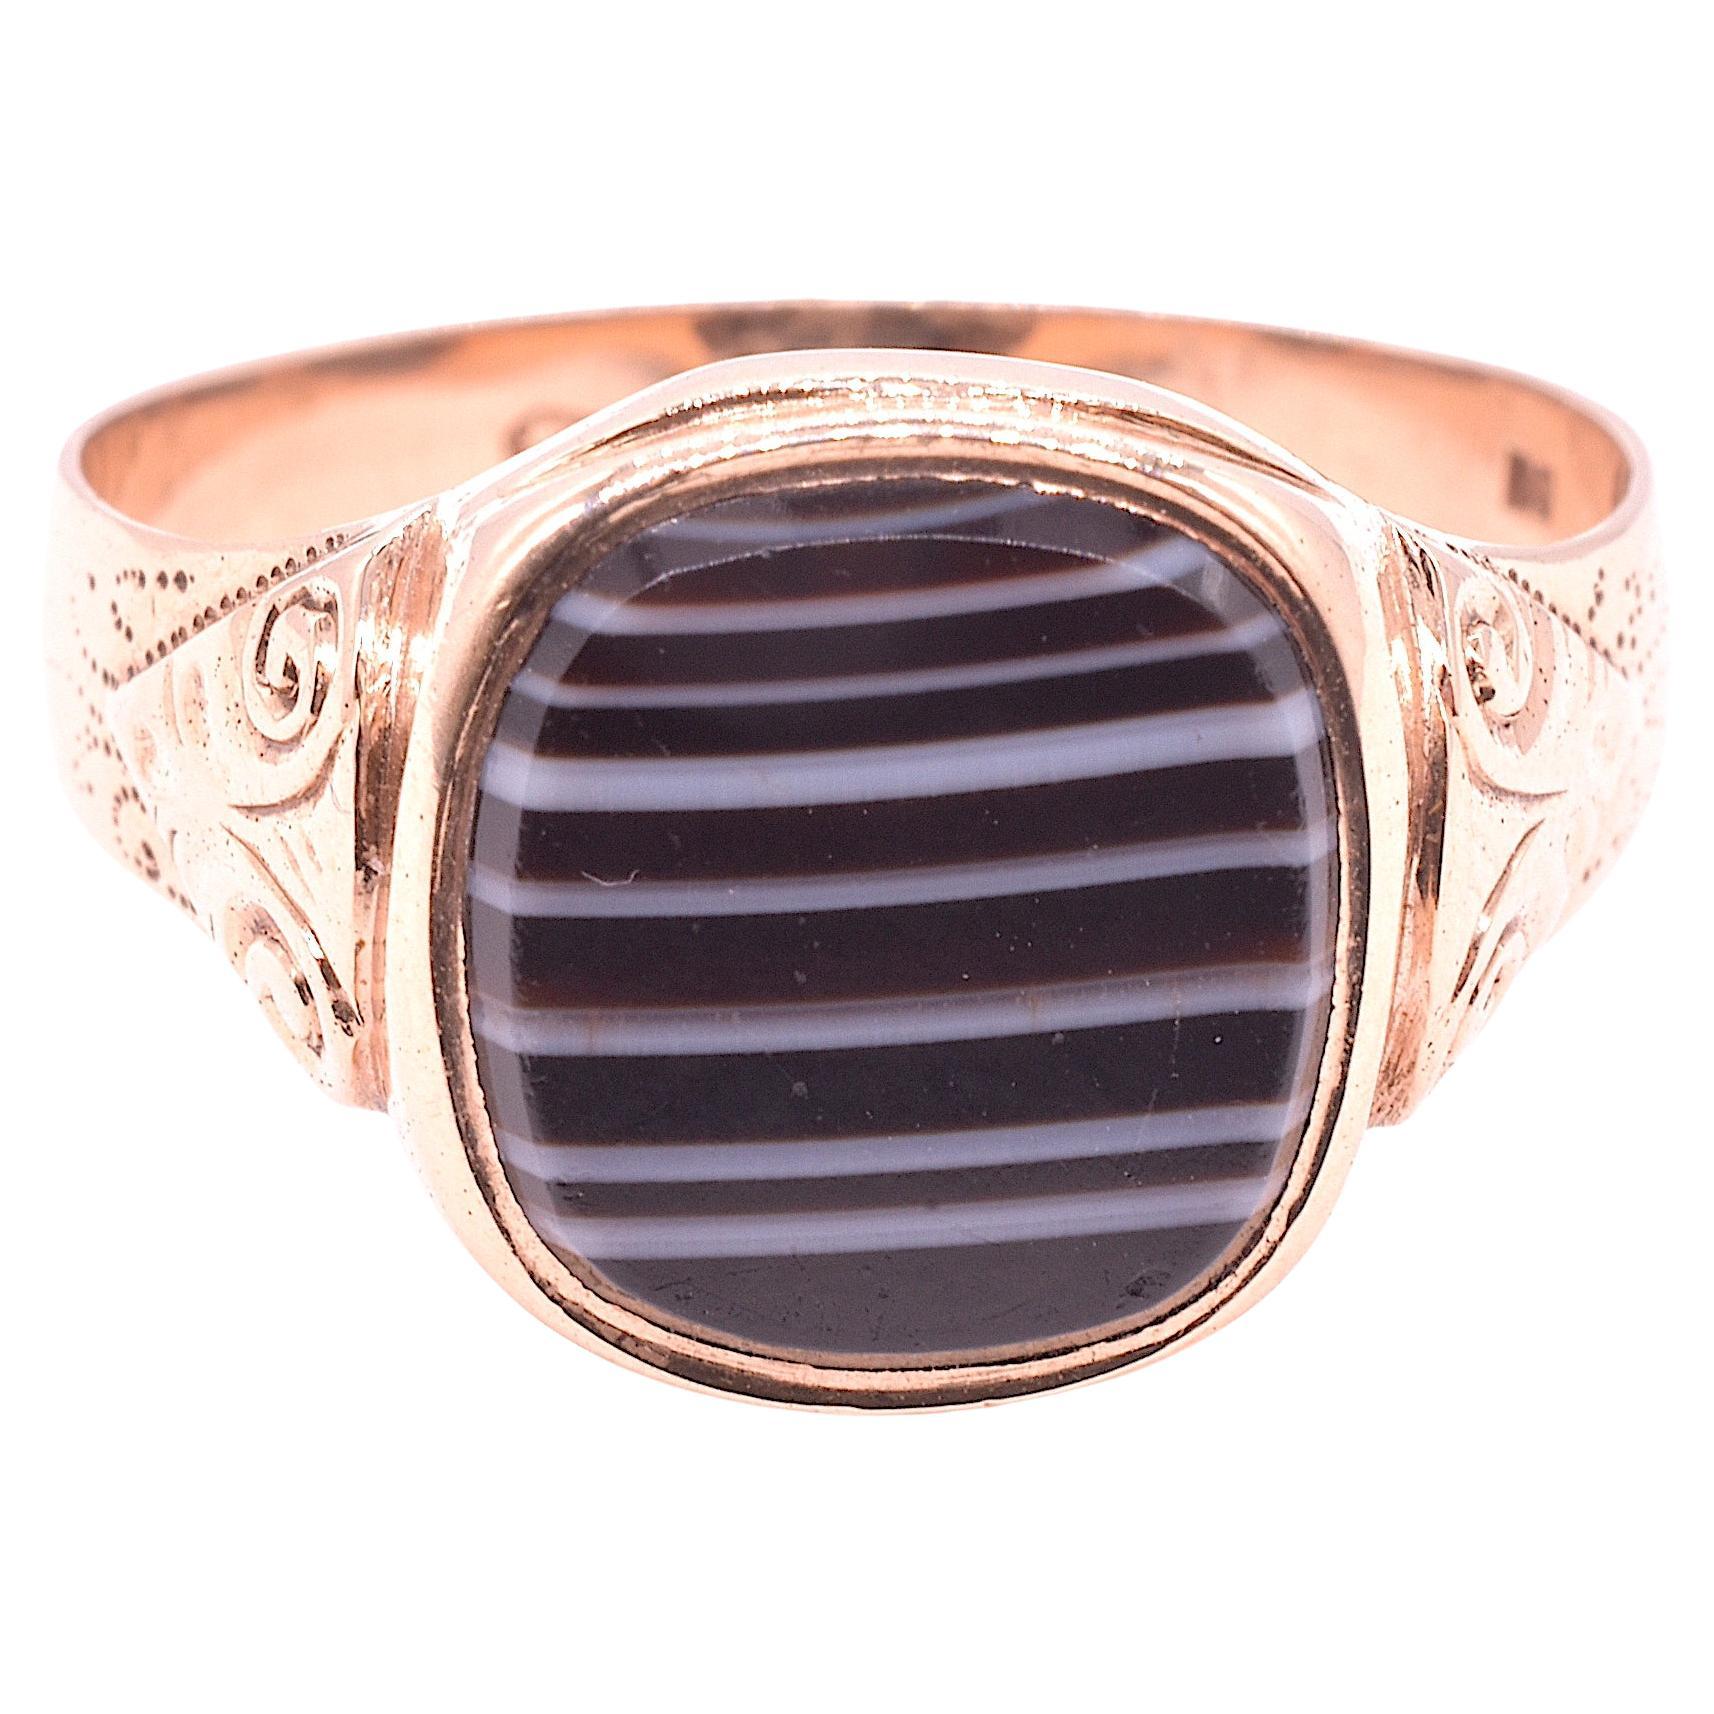 Unusual, rarely seen signet ring with a striking stone of banded agate. The ring has a very small cartouche stamp on the back, it could possibly be the harp indicated Irish origin. Banded agate is a form of quartz with parallel bands of black and